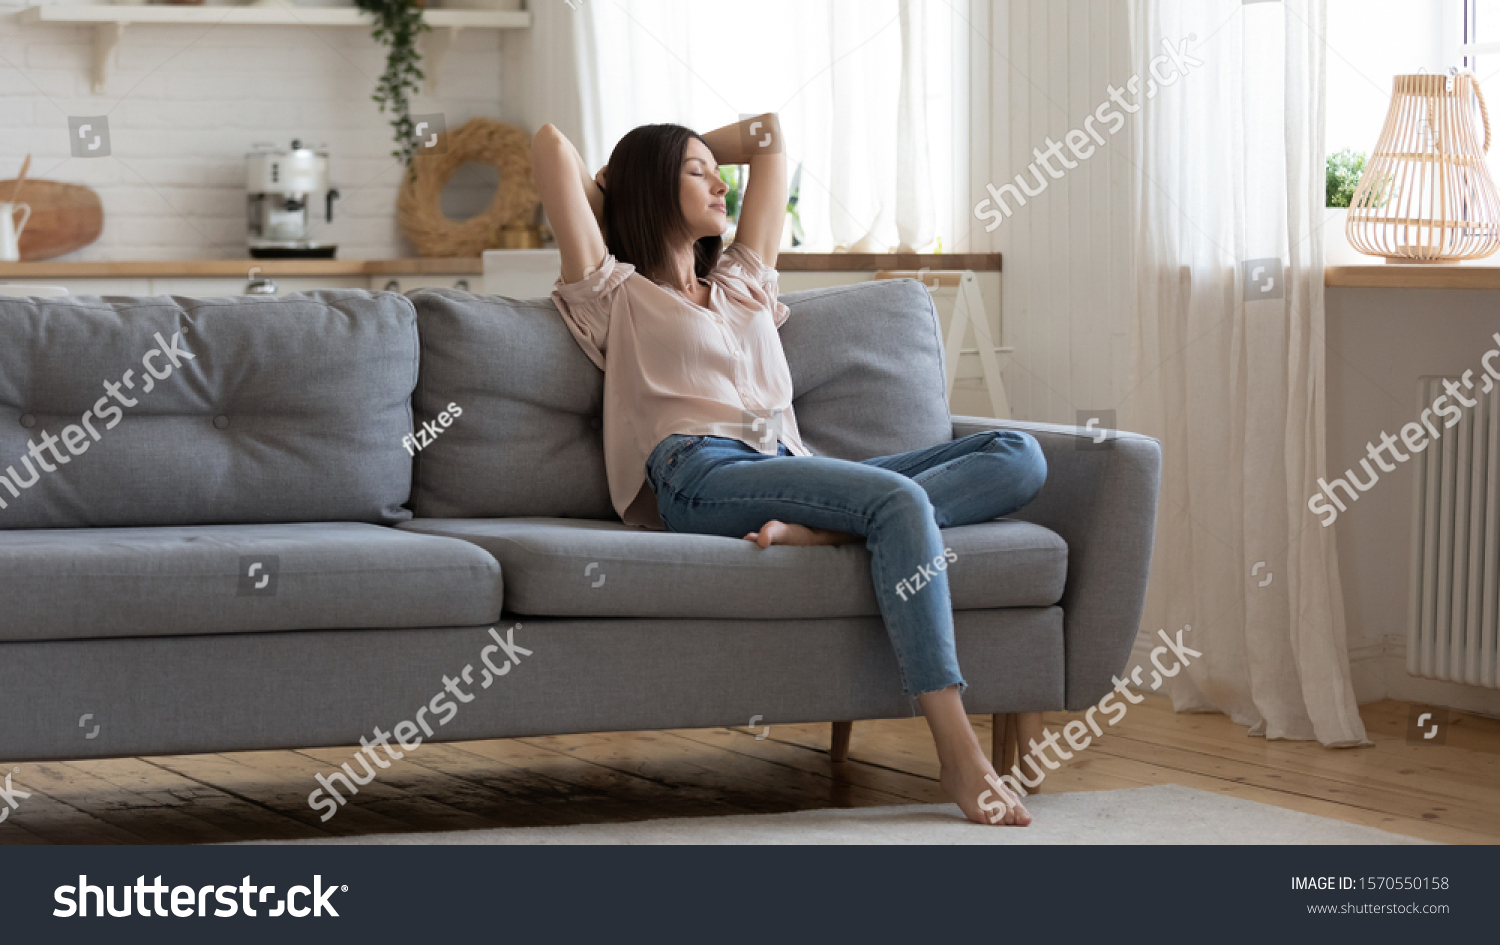 Serene lady housewife lounge sit on sofa feel fatigue napping hold hands behind head, calm young woman rest on comfort couch with eyes closed breath fresh air in cozy clean modern living room at home #1570550158